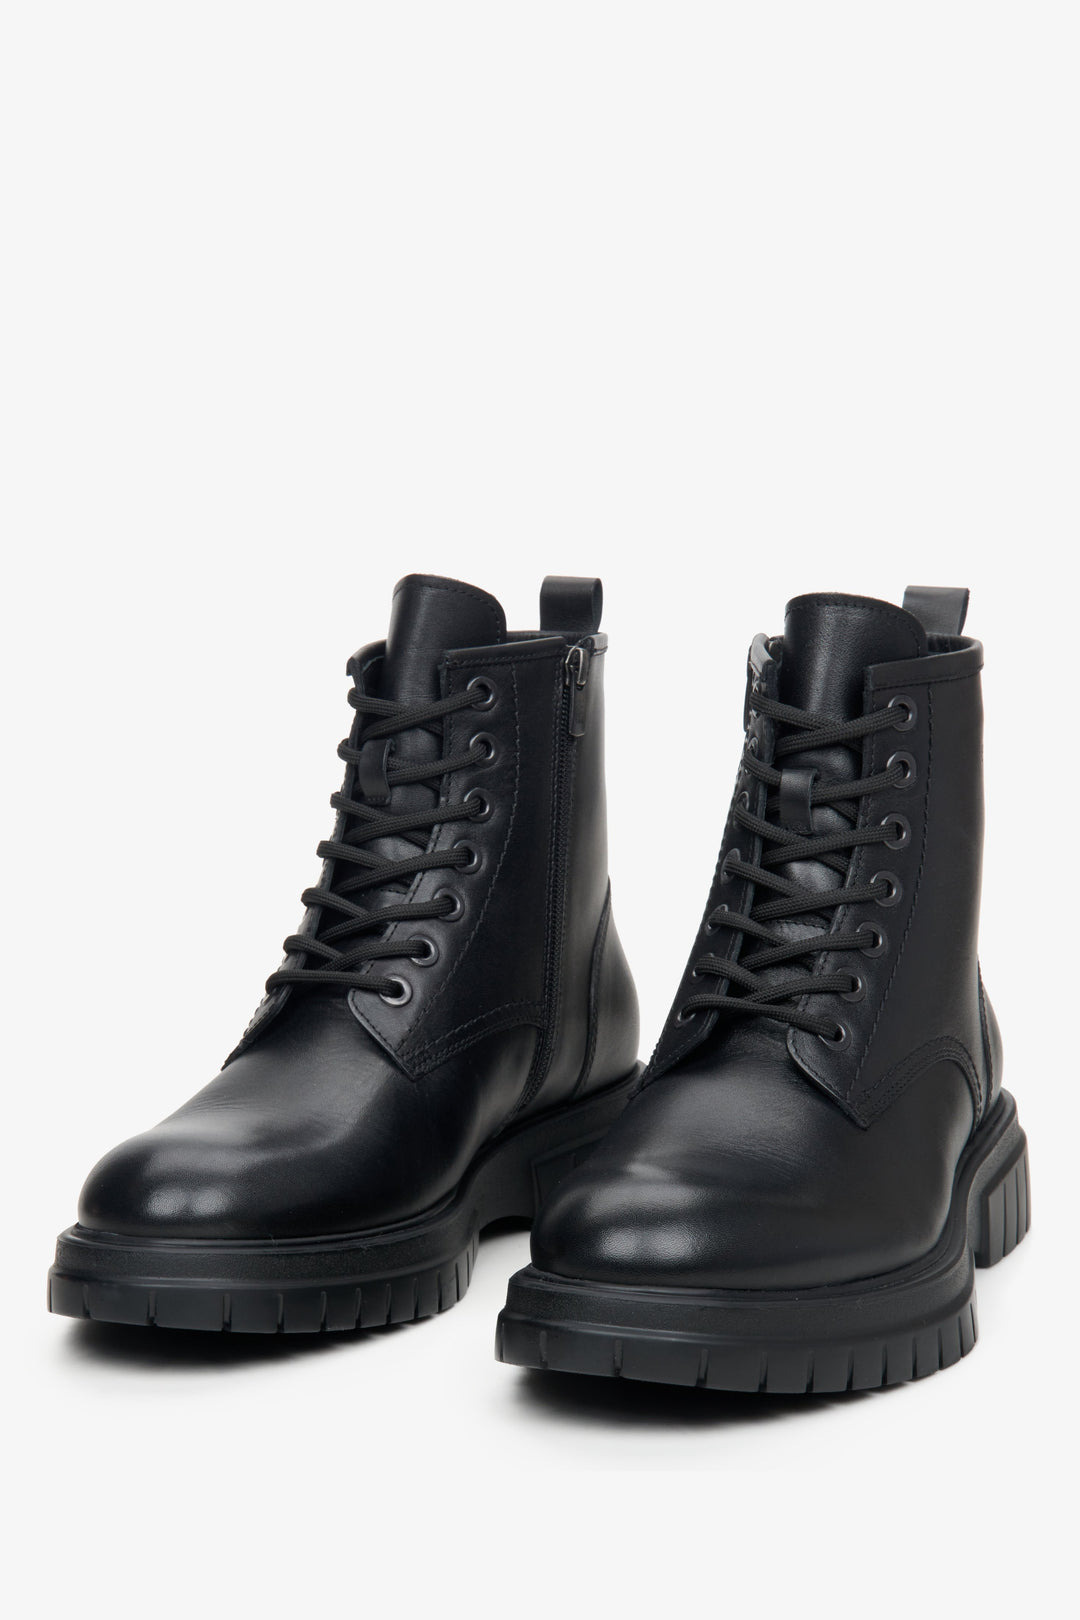 Men's black, leather Estro  winter ankle boots - close-up on the toe and decorative lacing.